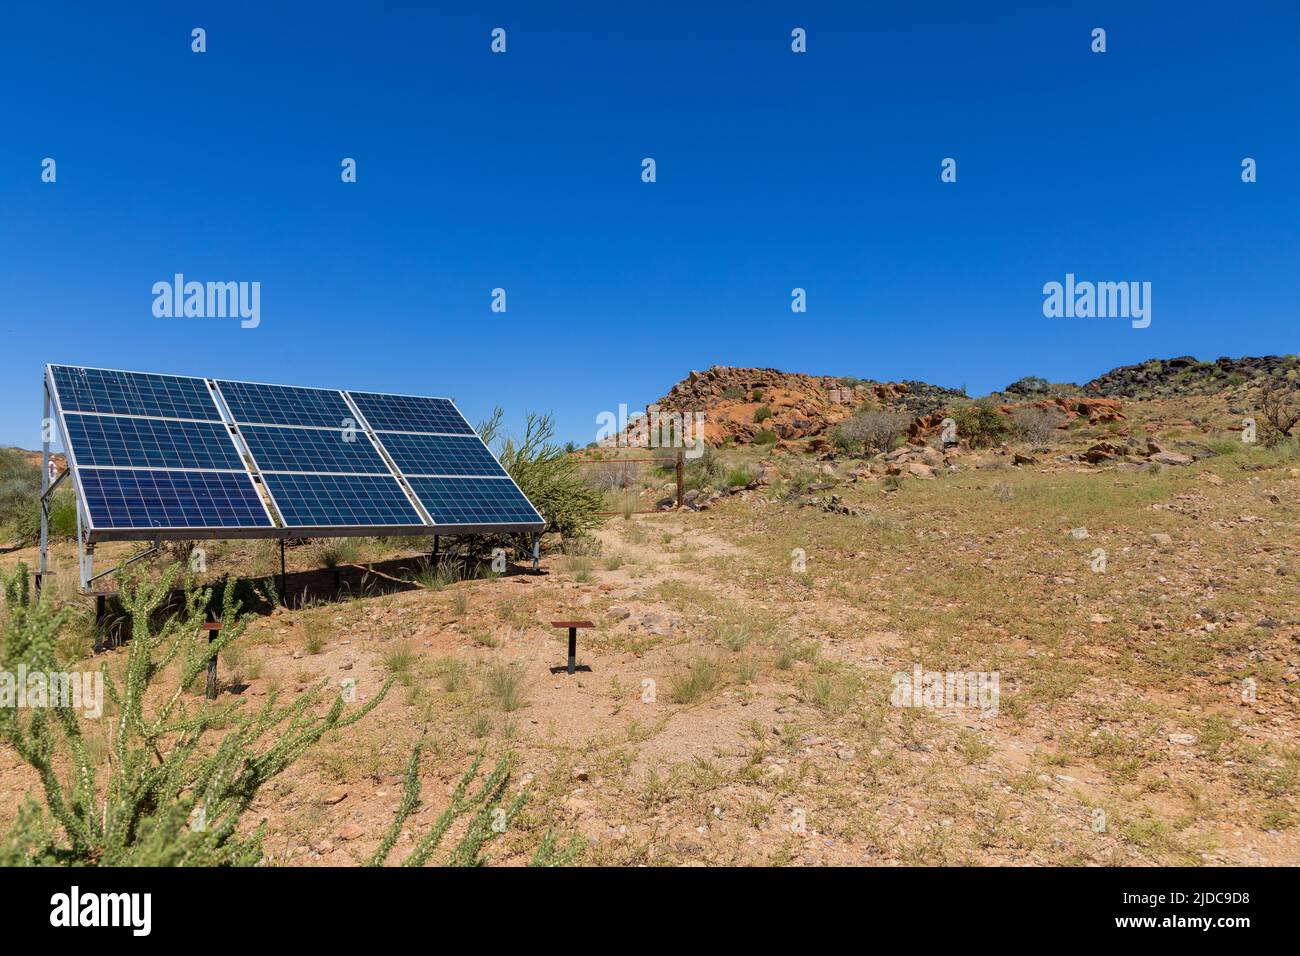 Isolated dry semi desert area with rocks and grassy sandy areas.  Nine solar panels mounted on a metal frame to provide electricity. Stock Photo